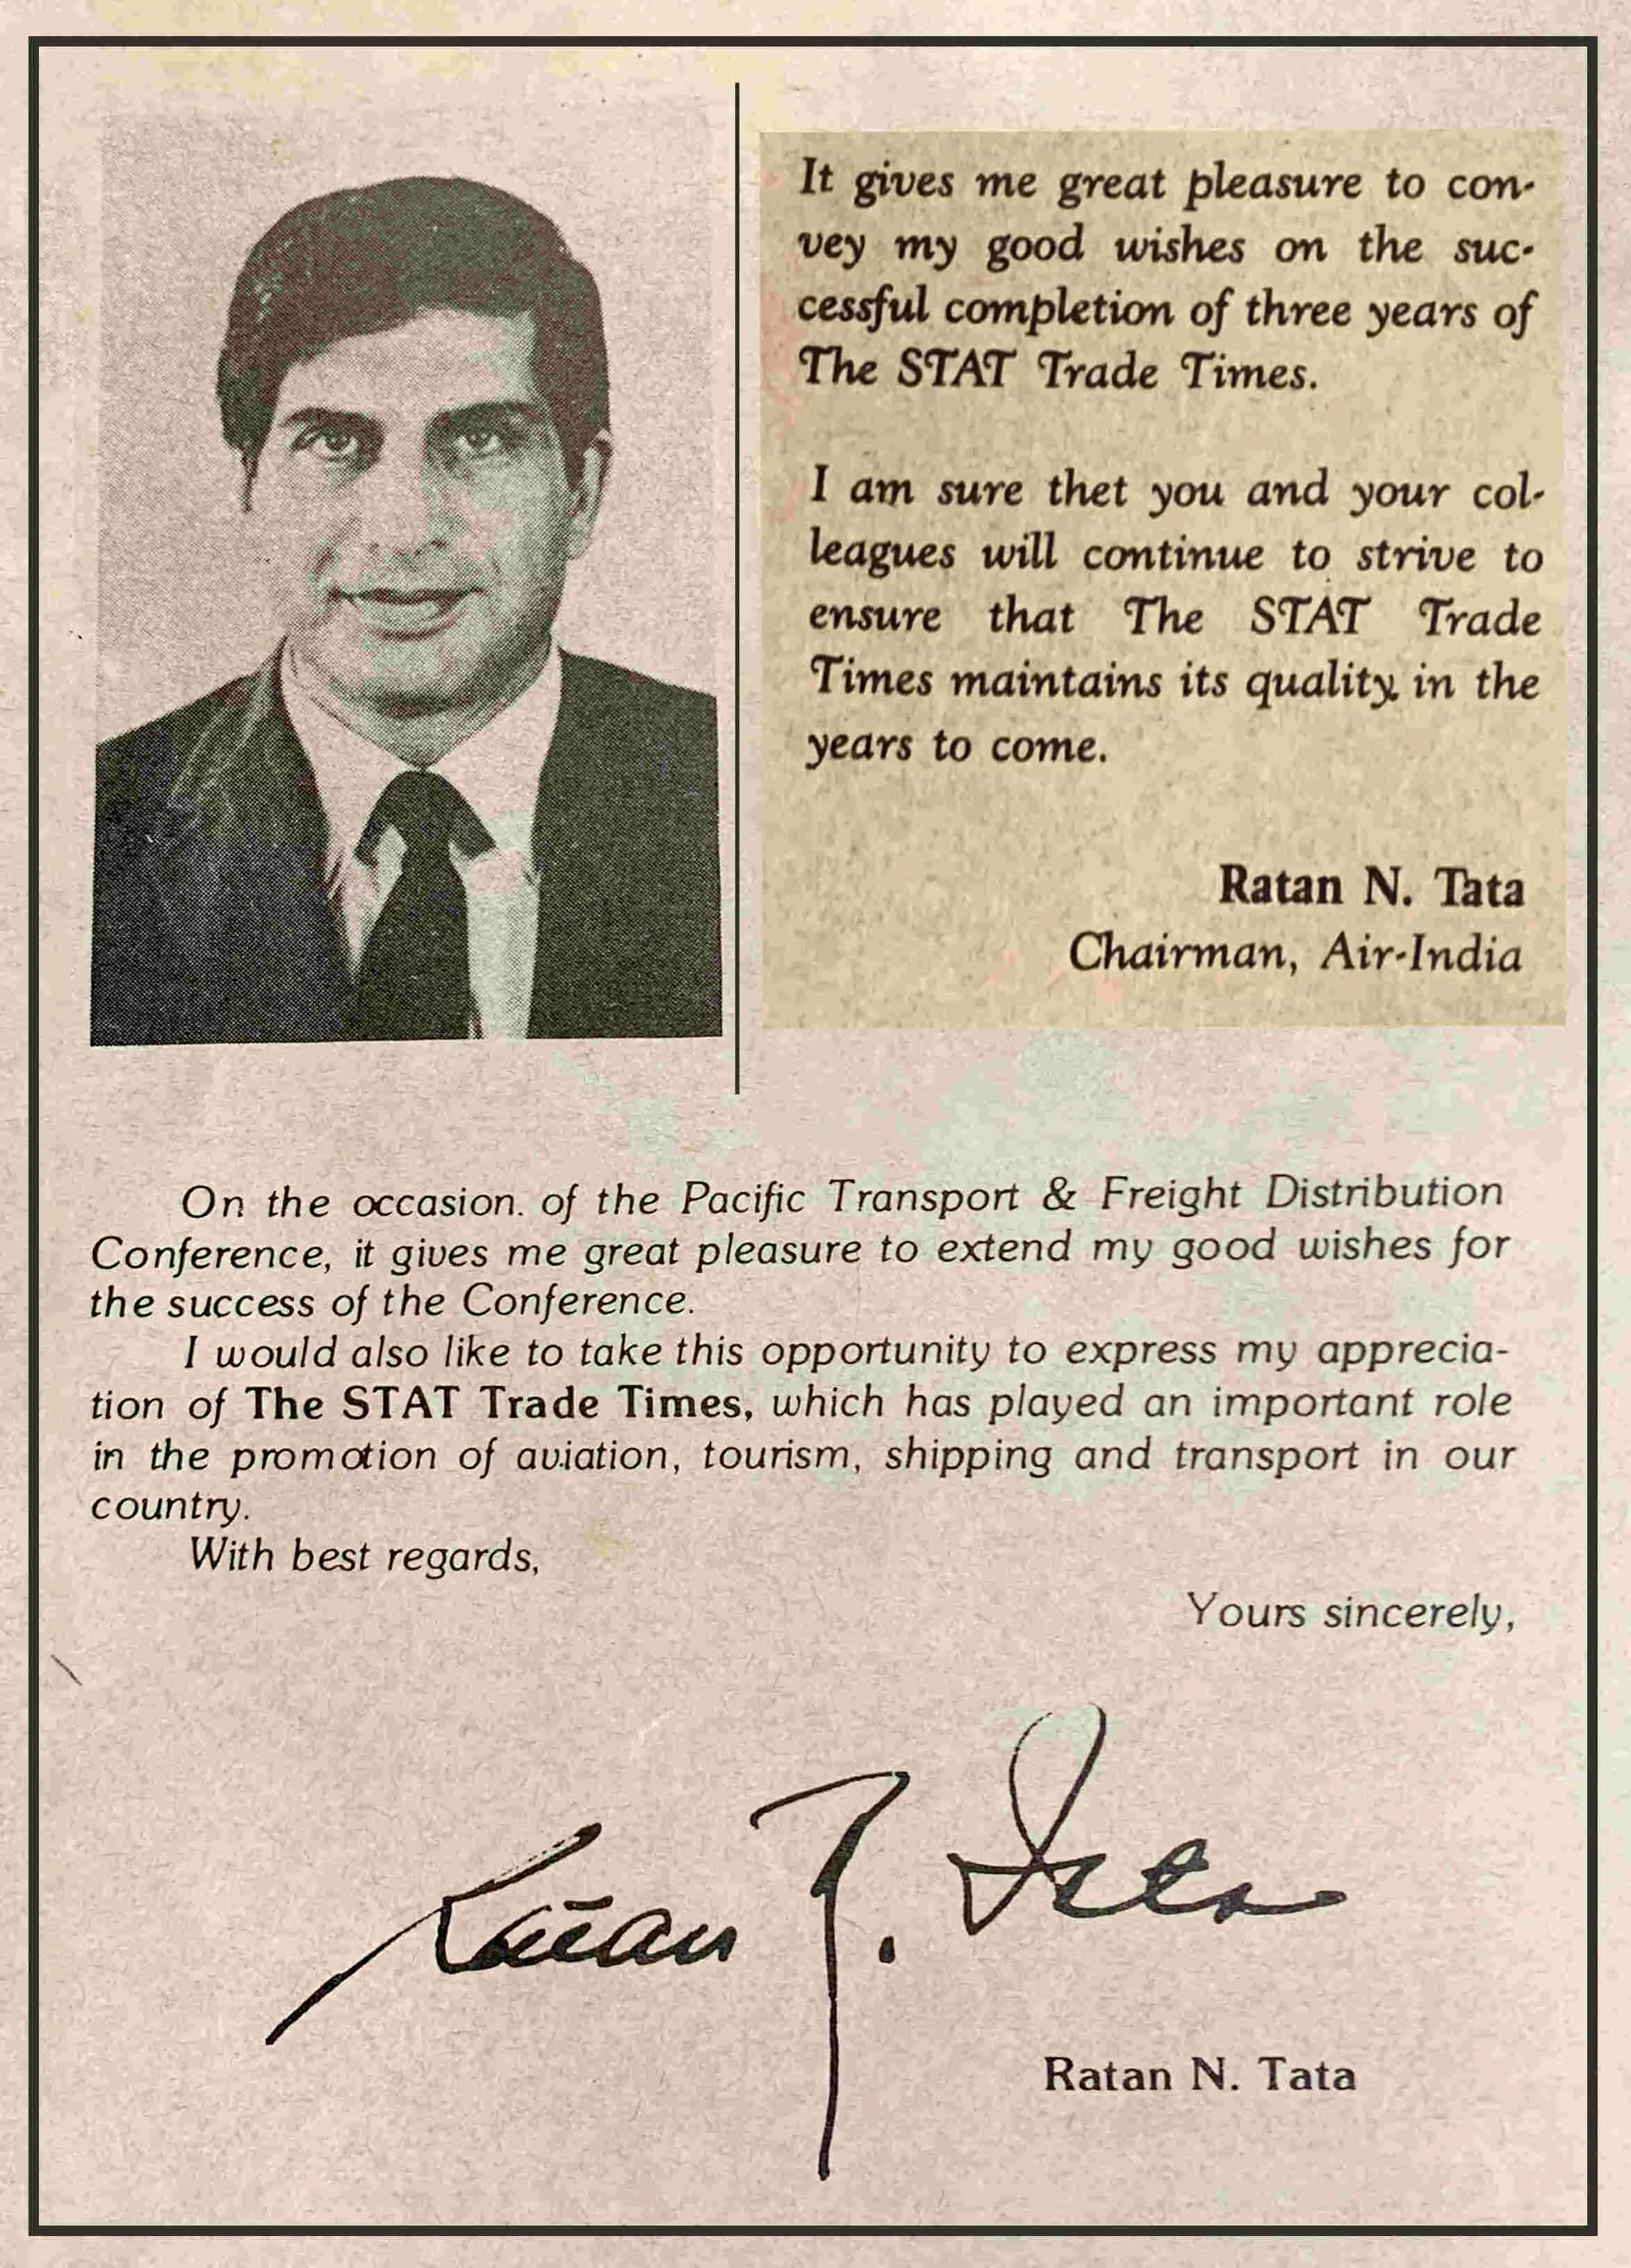 Air Indias former chairman Ratan Tatas personalised message to The STAT Trade Times published in the July 1988 and March 1989 editions of the magazine, where he commends the publication for its relentless coverage of aviation, tourism, shipping and transport.